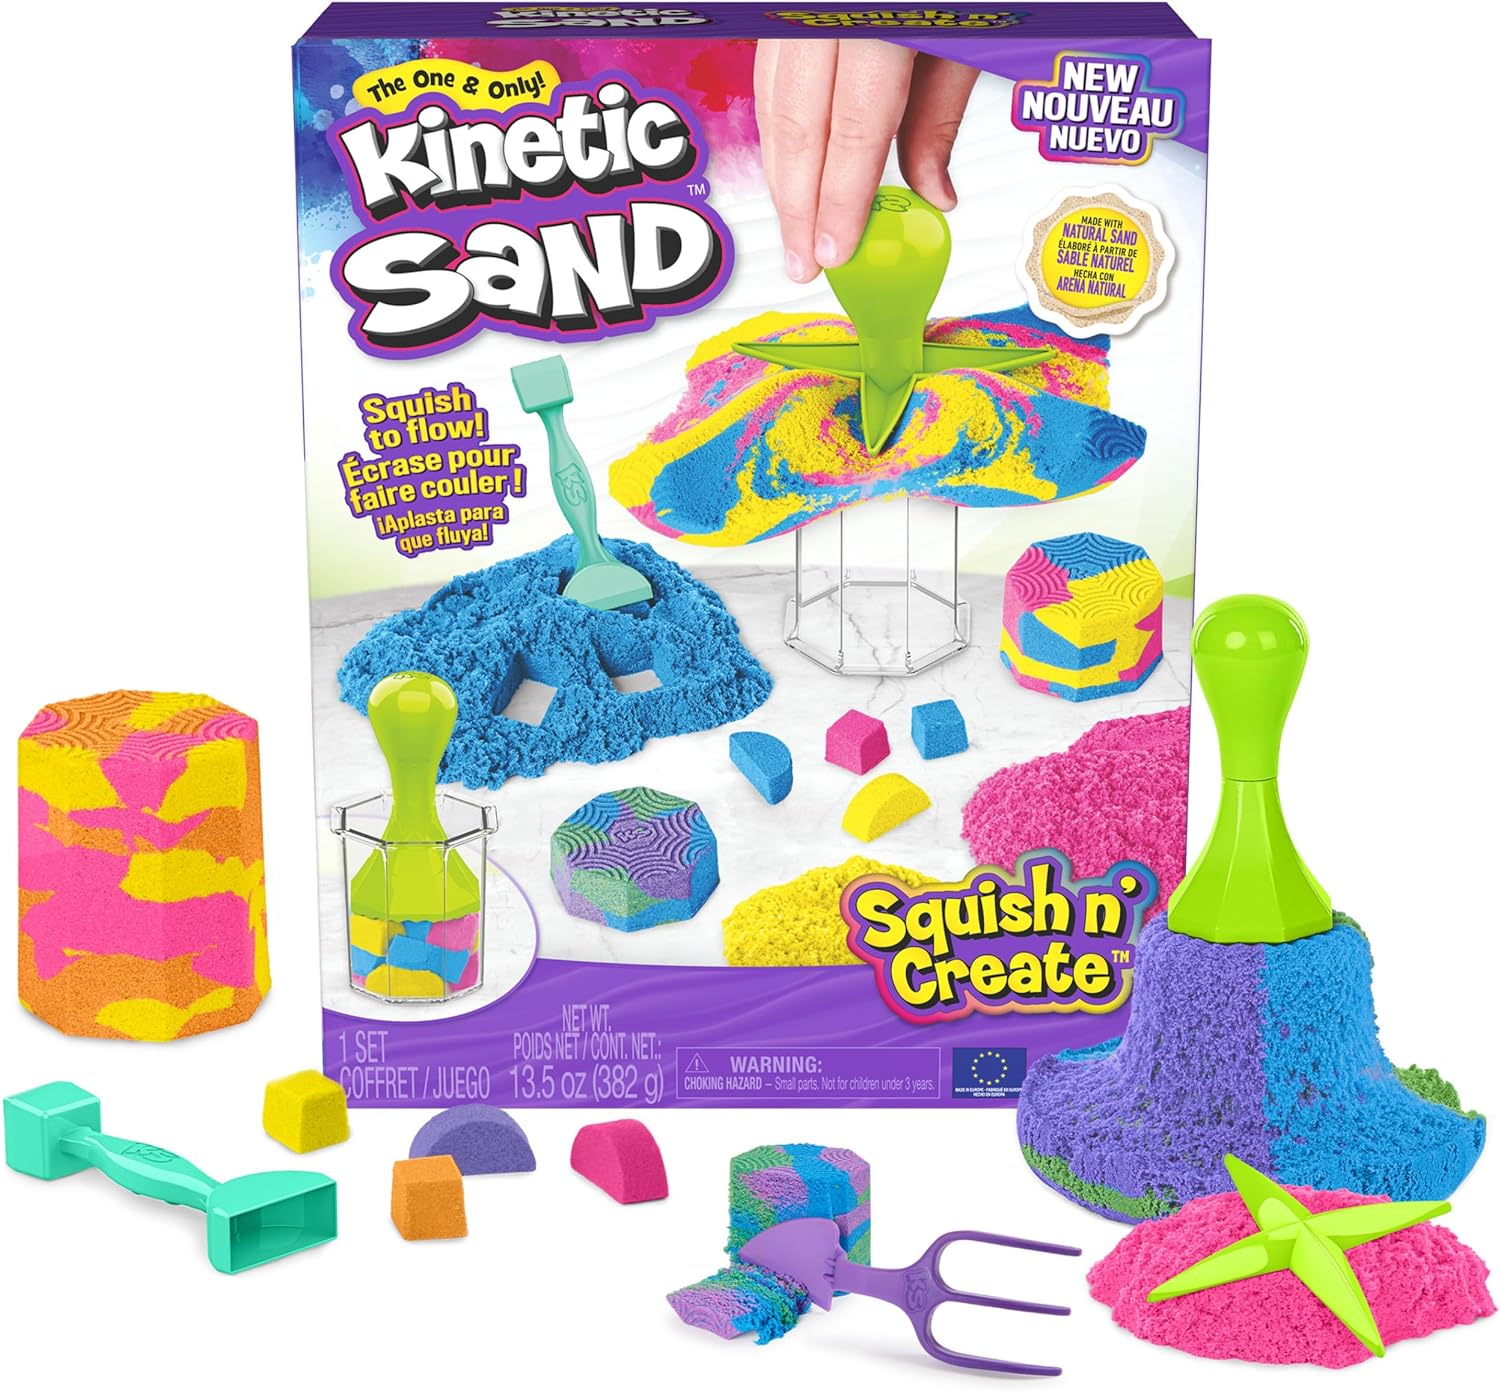 Kinetic Sand, Squish N’ Create Playset, with 13.5oz of Blue, Yellow & Pink Play Sand, 5 Tools, Stocking Stuffers for Kids